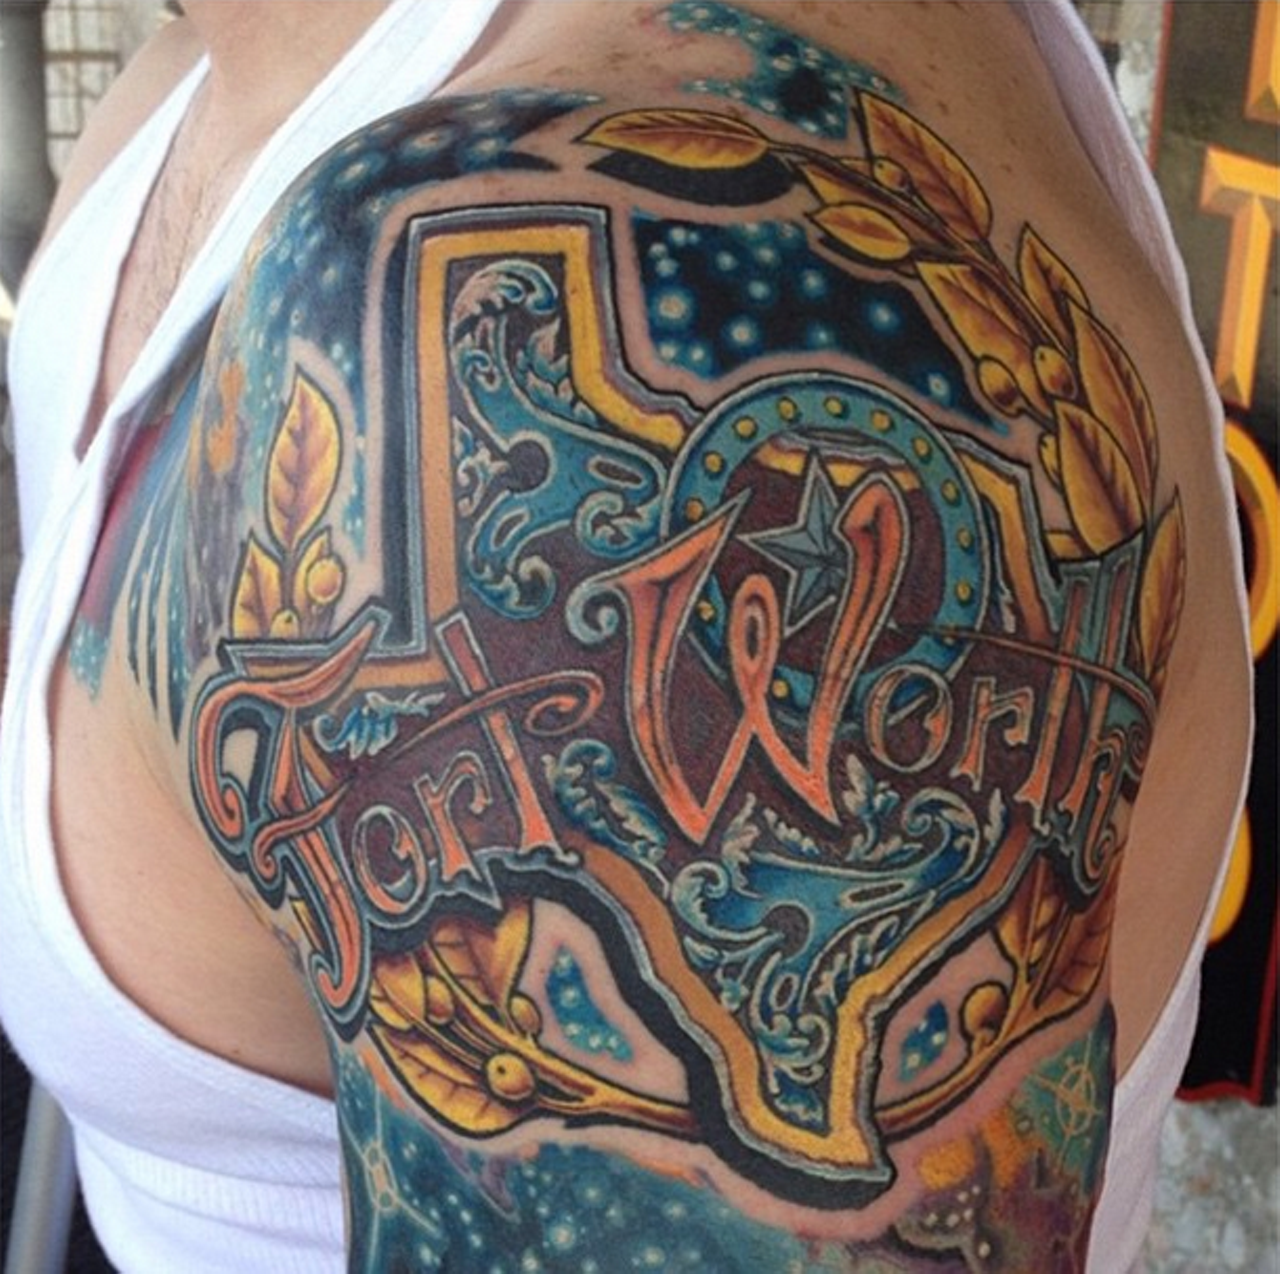 10 CityThemed Tattoos That Show How Much Yelpers Love Where They Live   Yelp  Official Blog